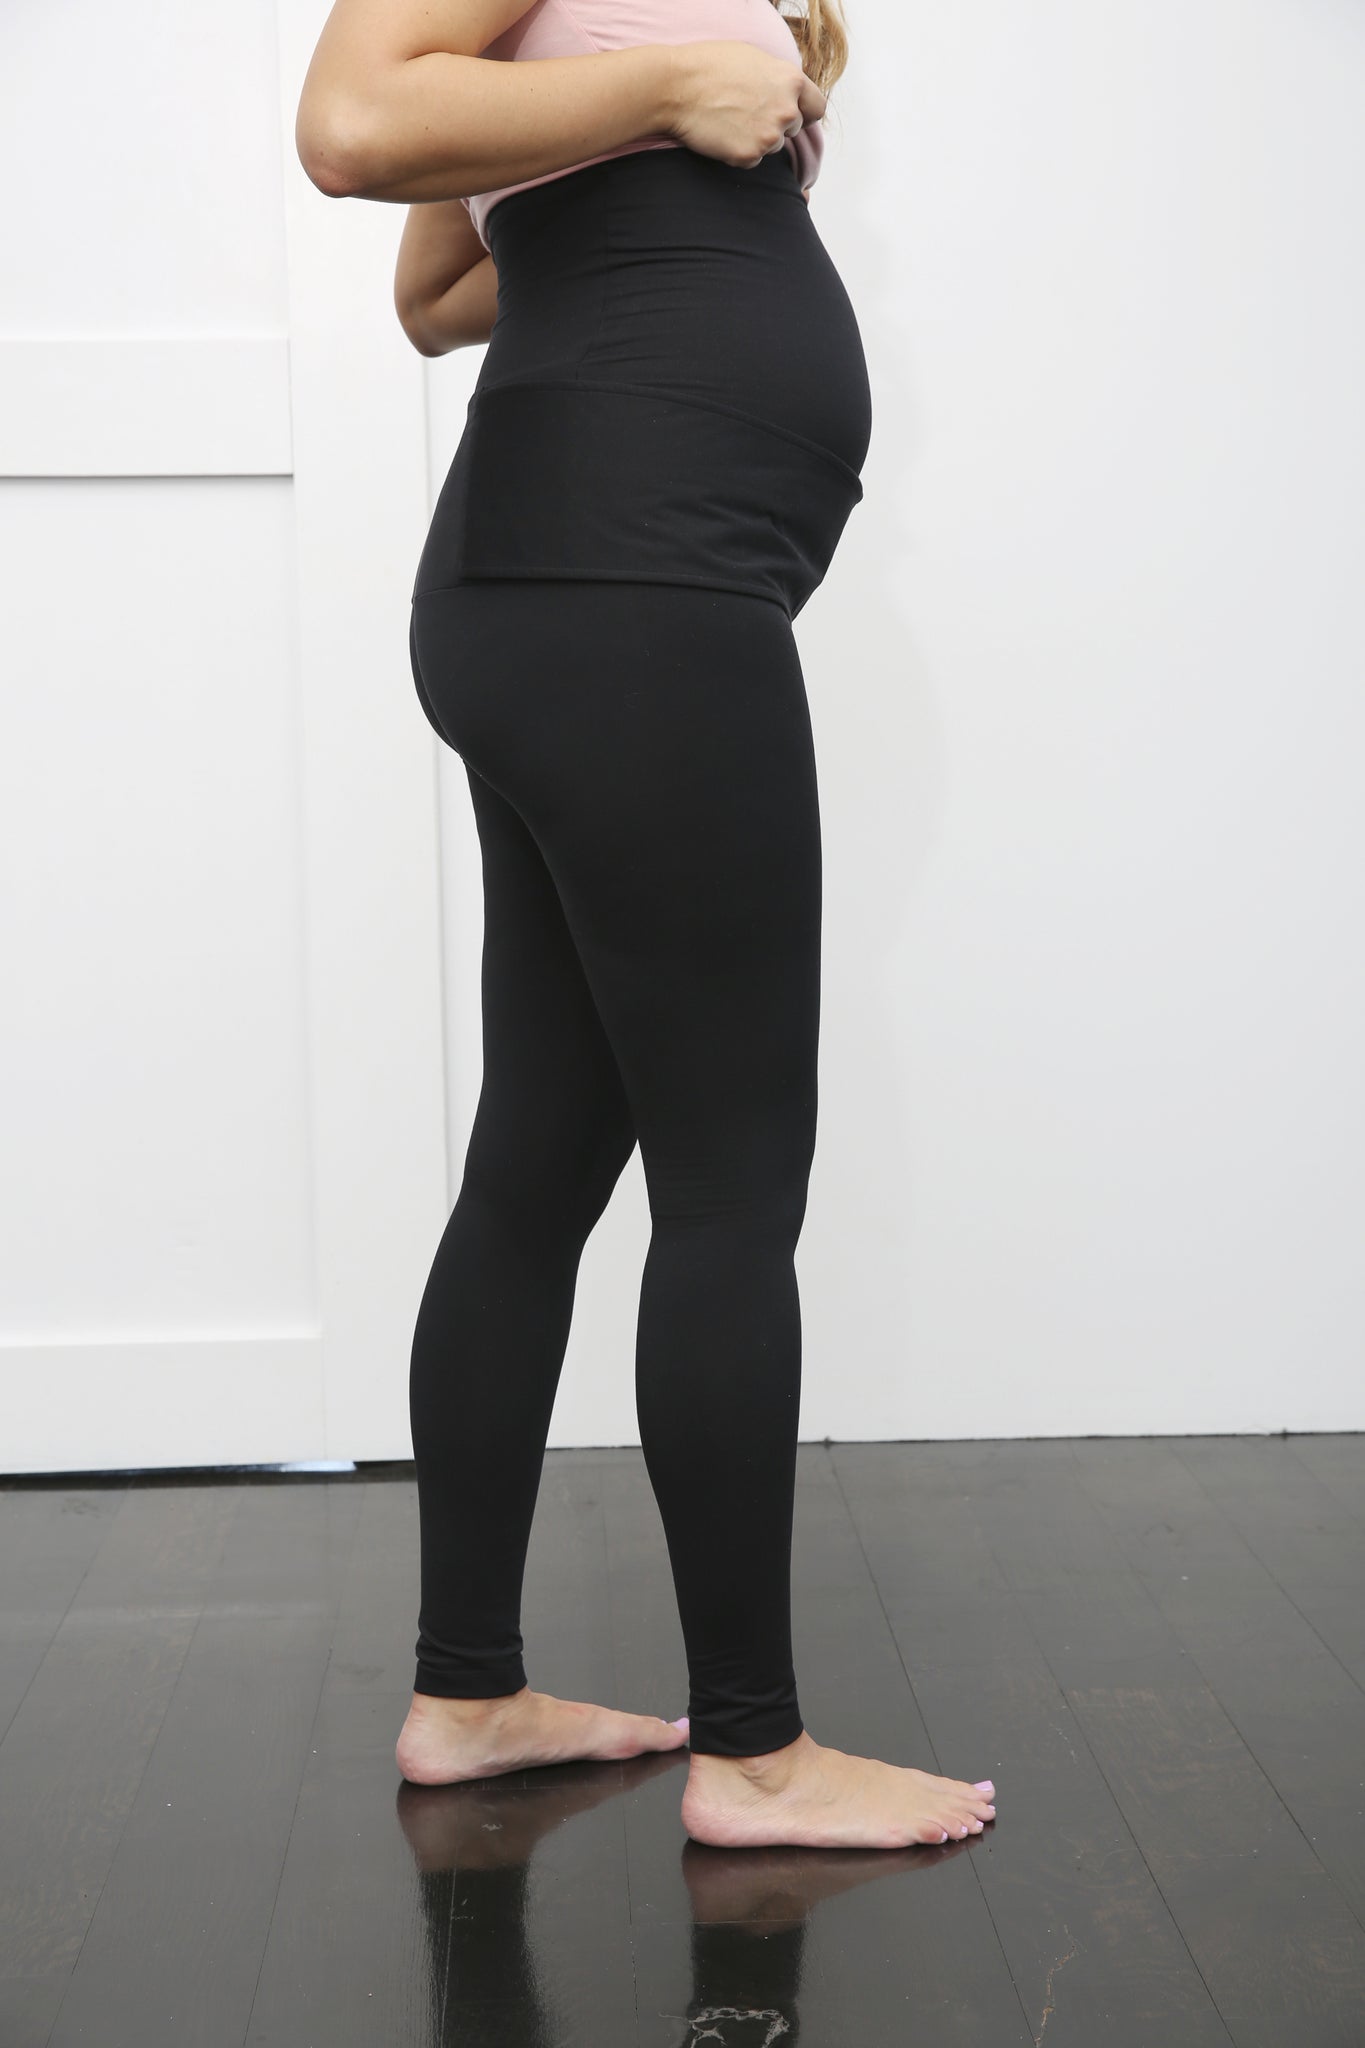 Maternity Yoga Pants Support Belly Leggings Pregnancy Trousers Pregnant  Women Sport Pants Workout Activewear Lounge Knit Tights H1221 From  Mengyang10, $12.88